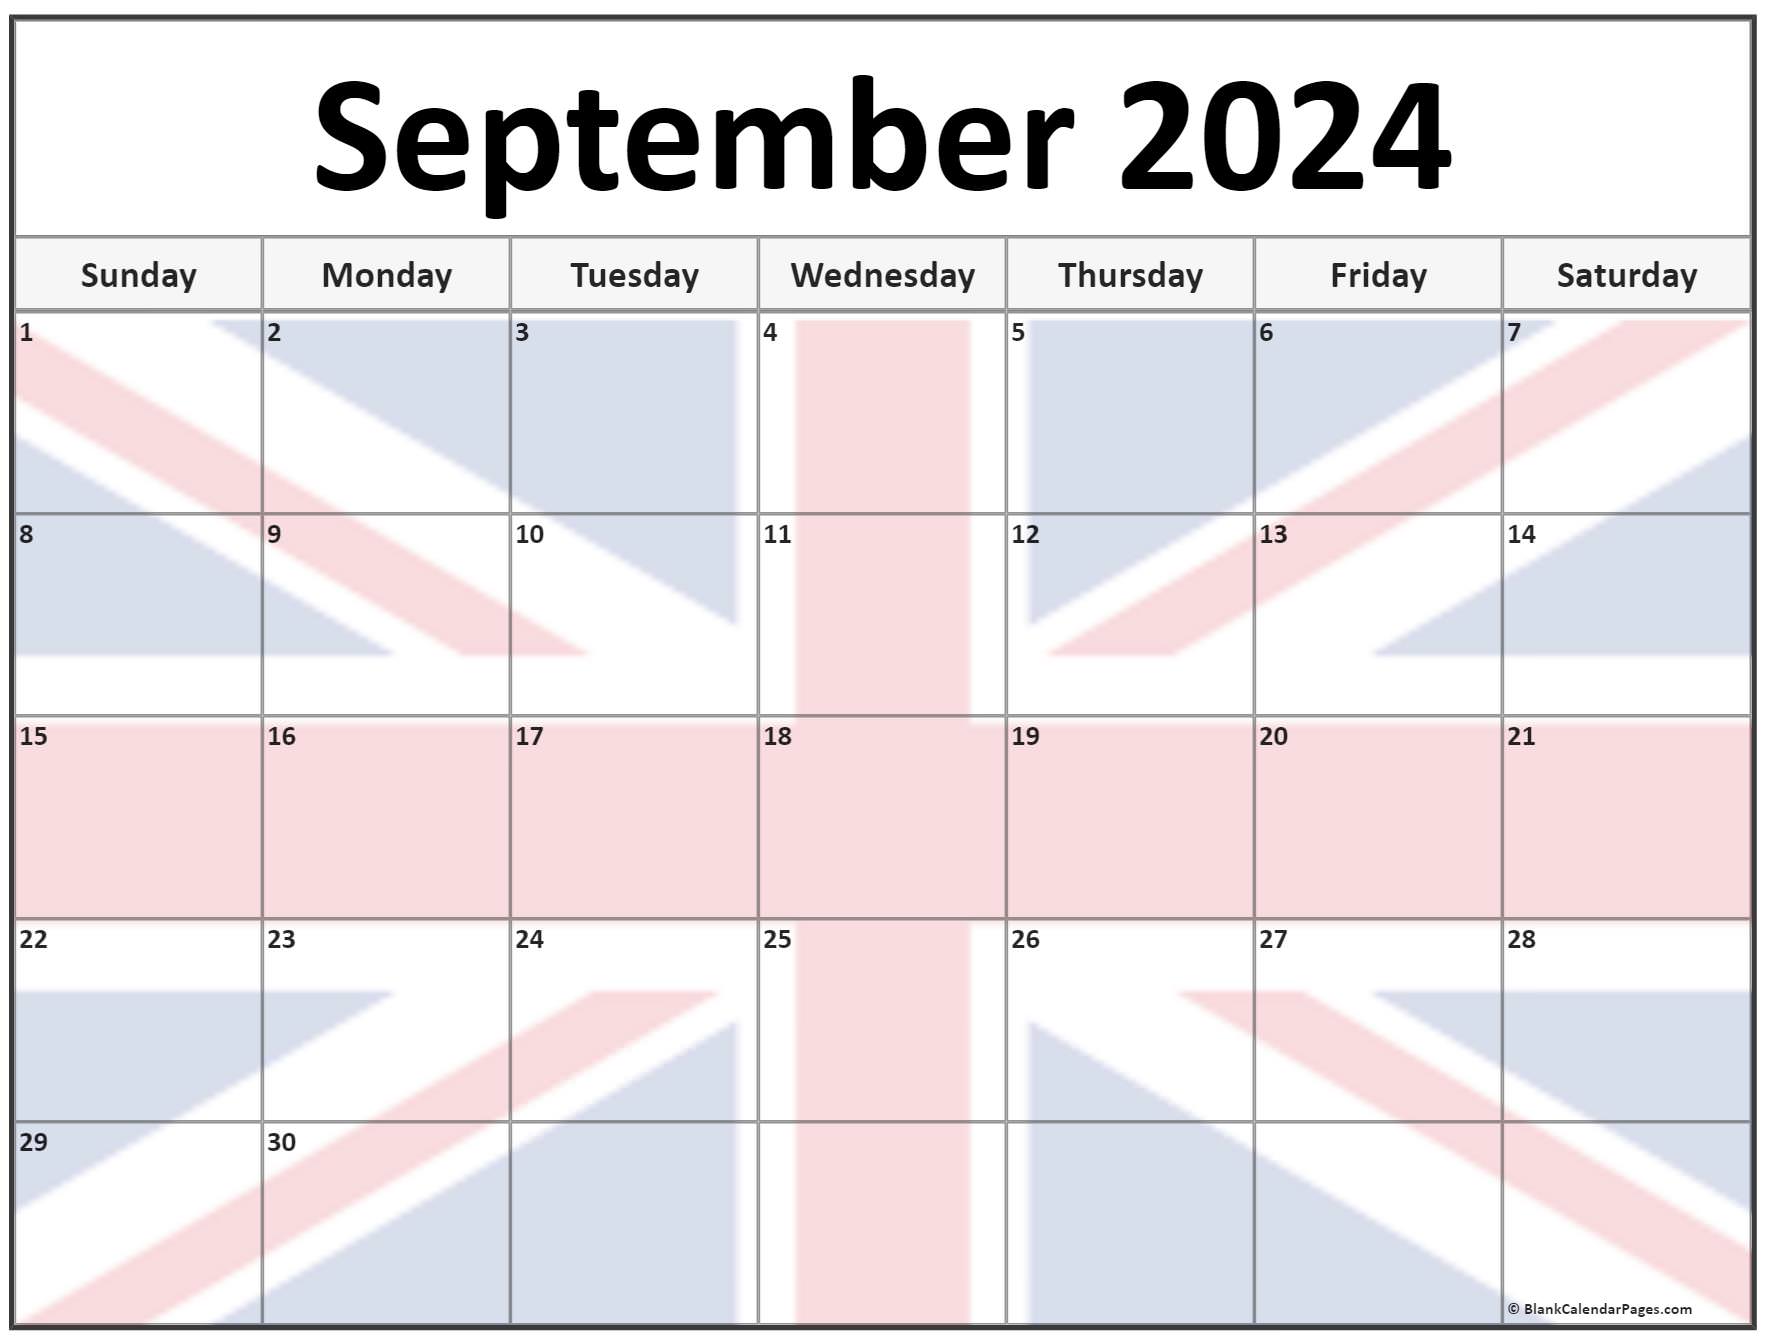 Collection of September 2022 photo calendars with image ...